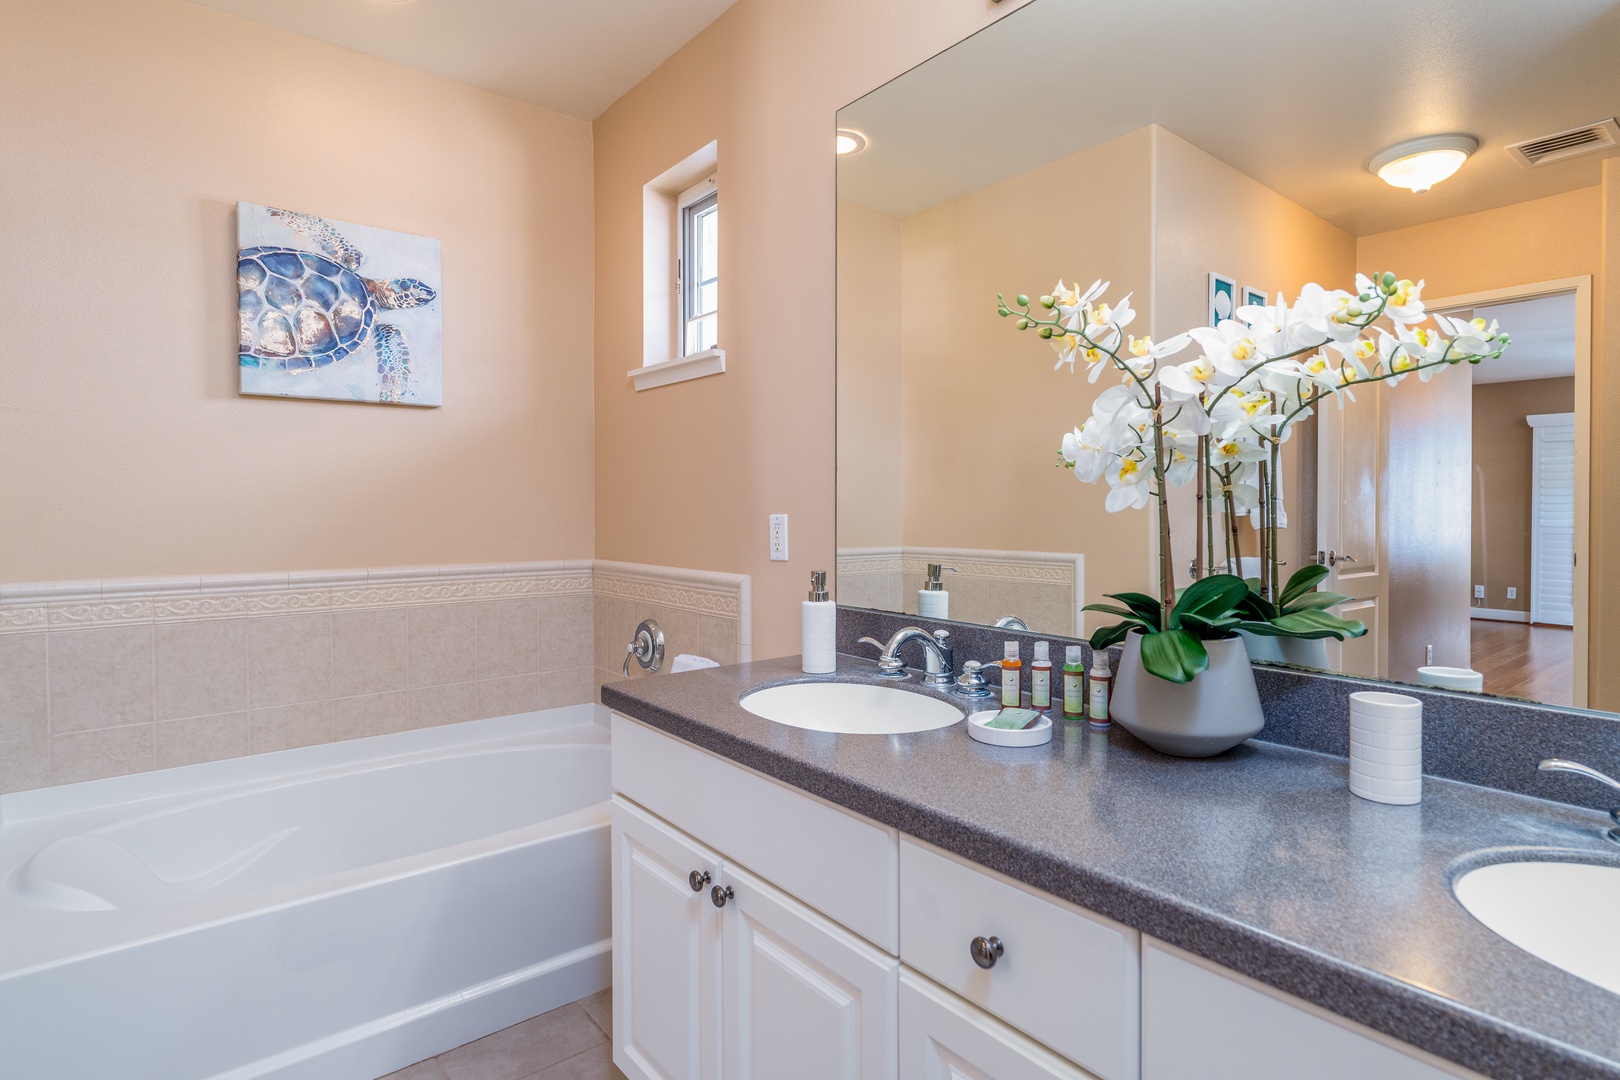 Kapolei Vacation Rentals, Ko Olina Kai 1081C - The guest bathroom with a bathtub for luxurious soaking and rest.